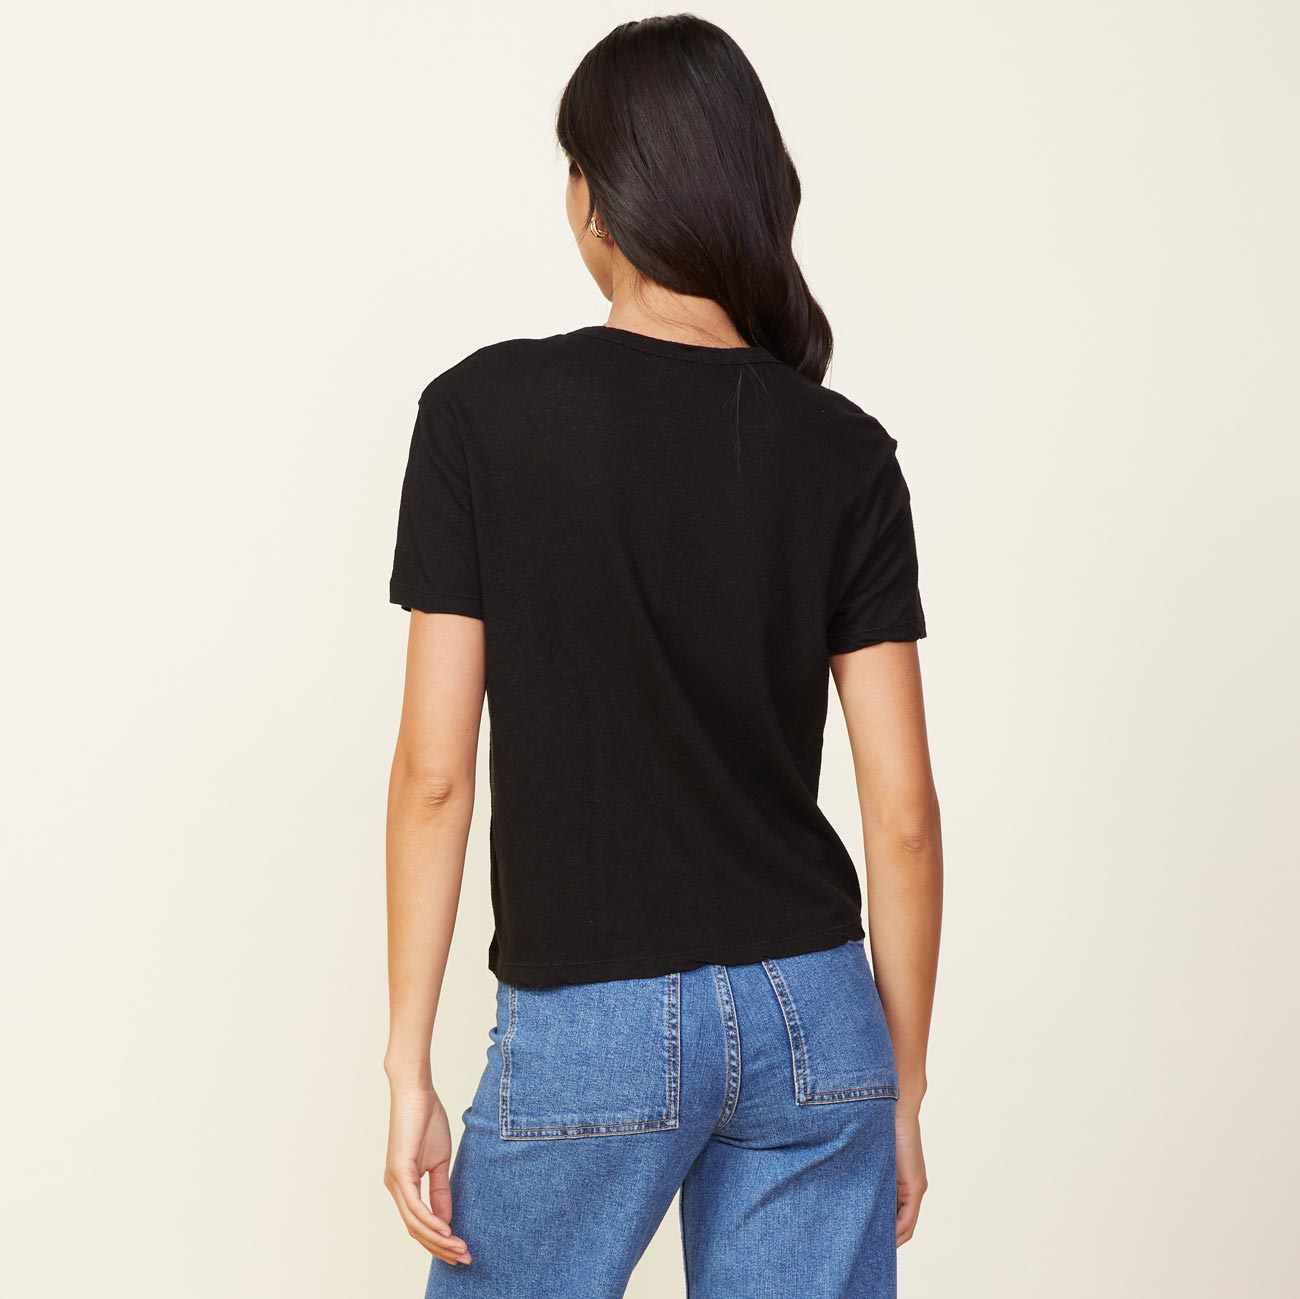 Back view of model wearing the linen athletic tee in black.